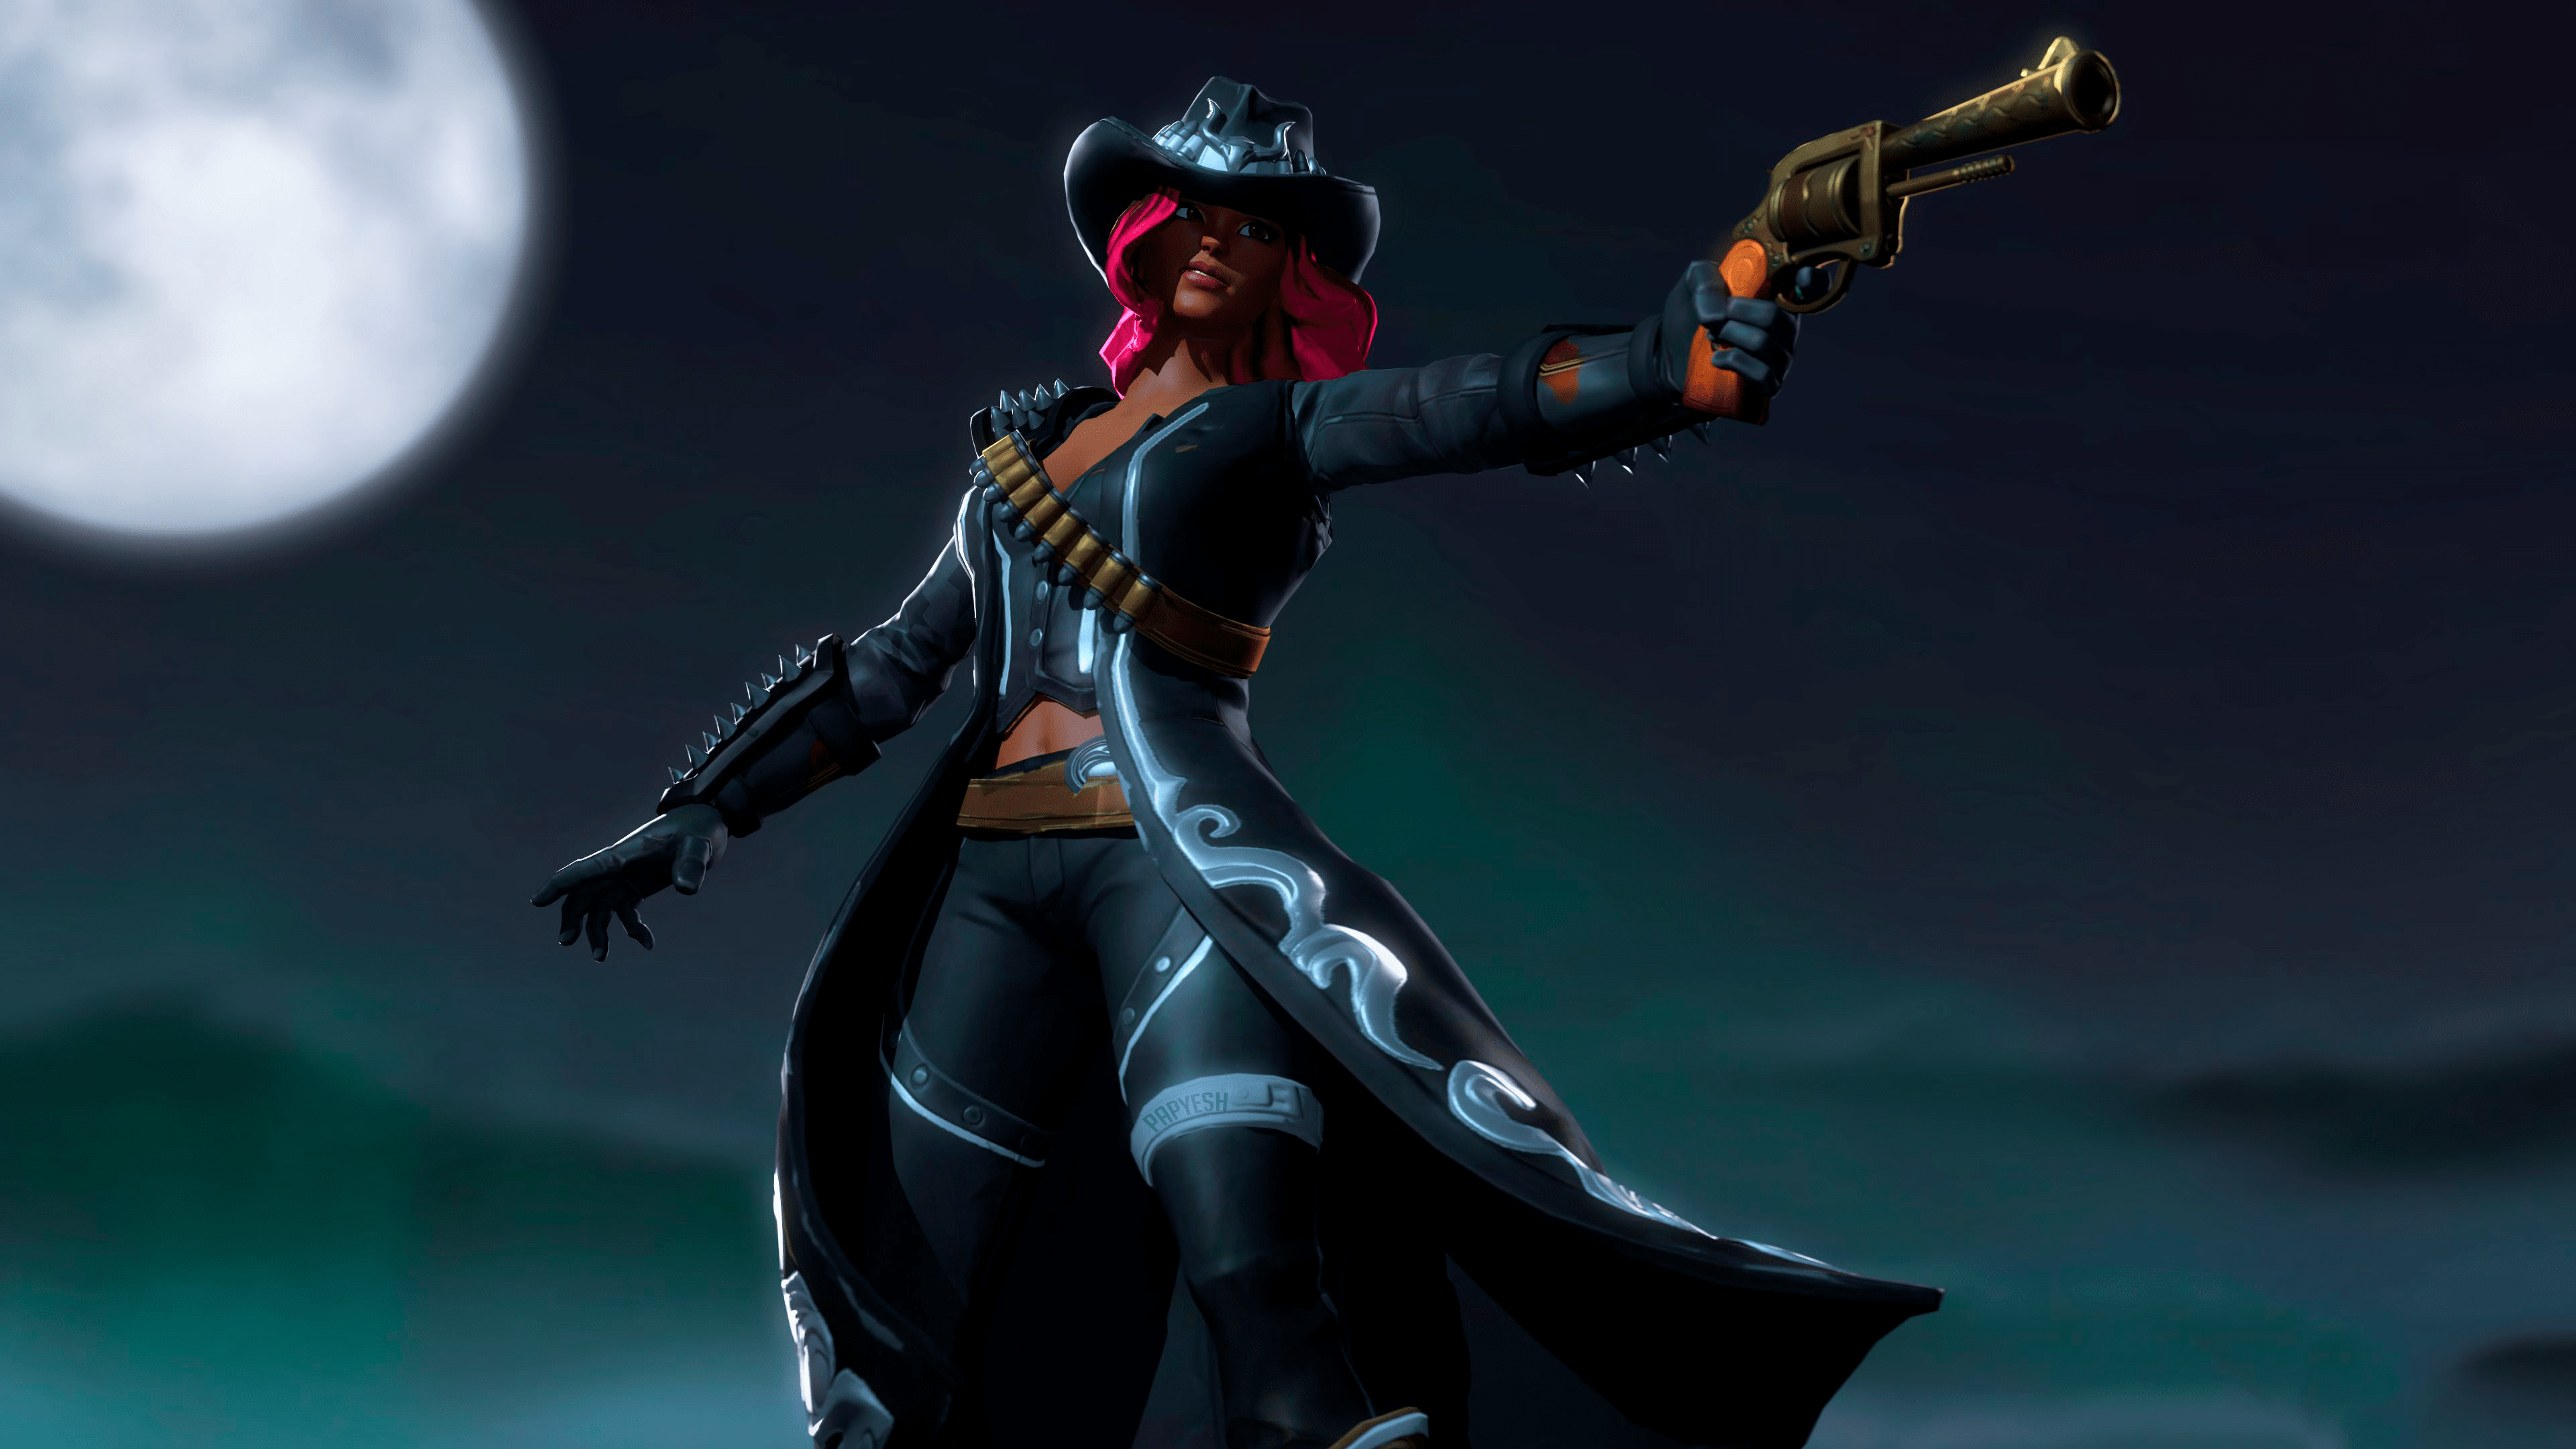 Calamity Wallpaper Fortnite Season 6 All Stages